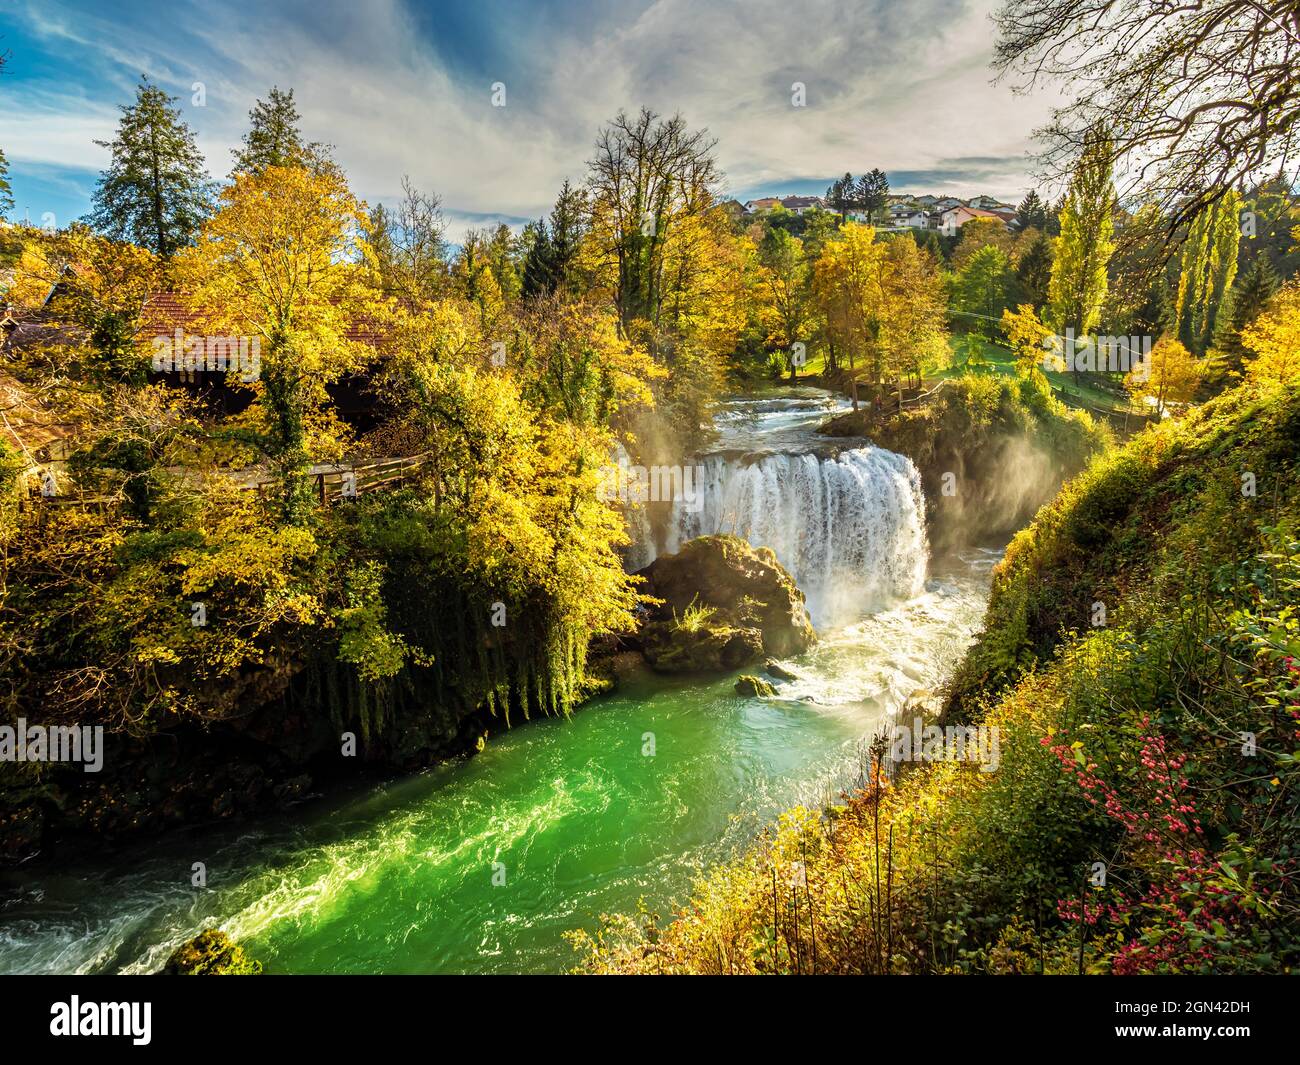 Natural parkland in the fall season, with colorful trees and a waterfall in Rastoke, Croatia Stock Photo